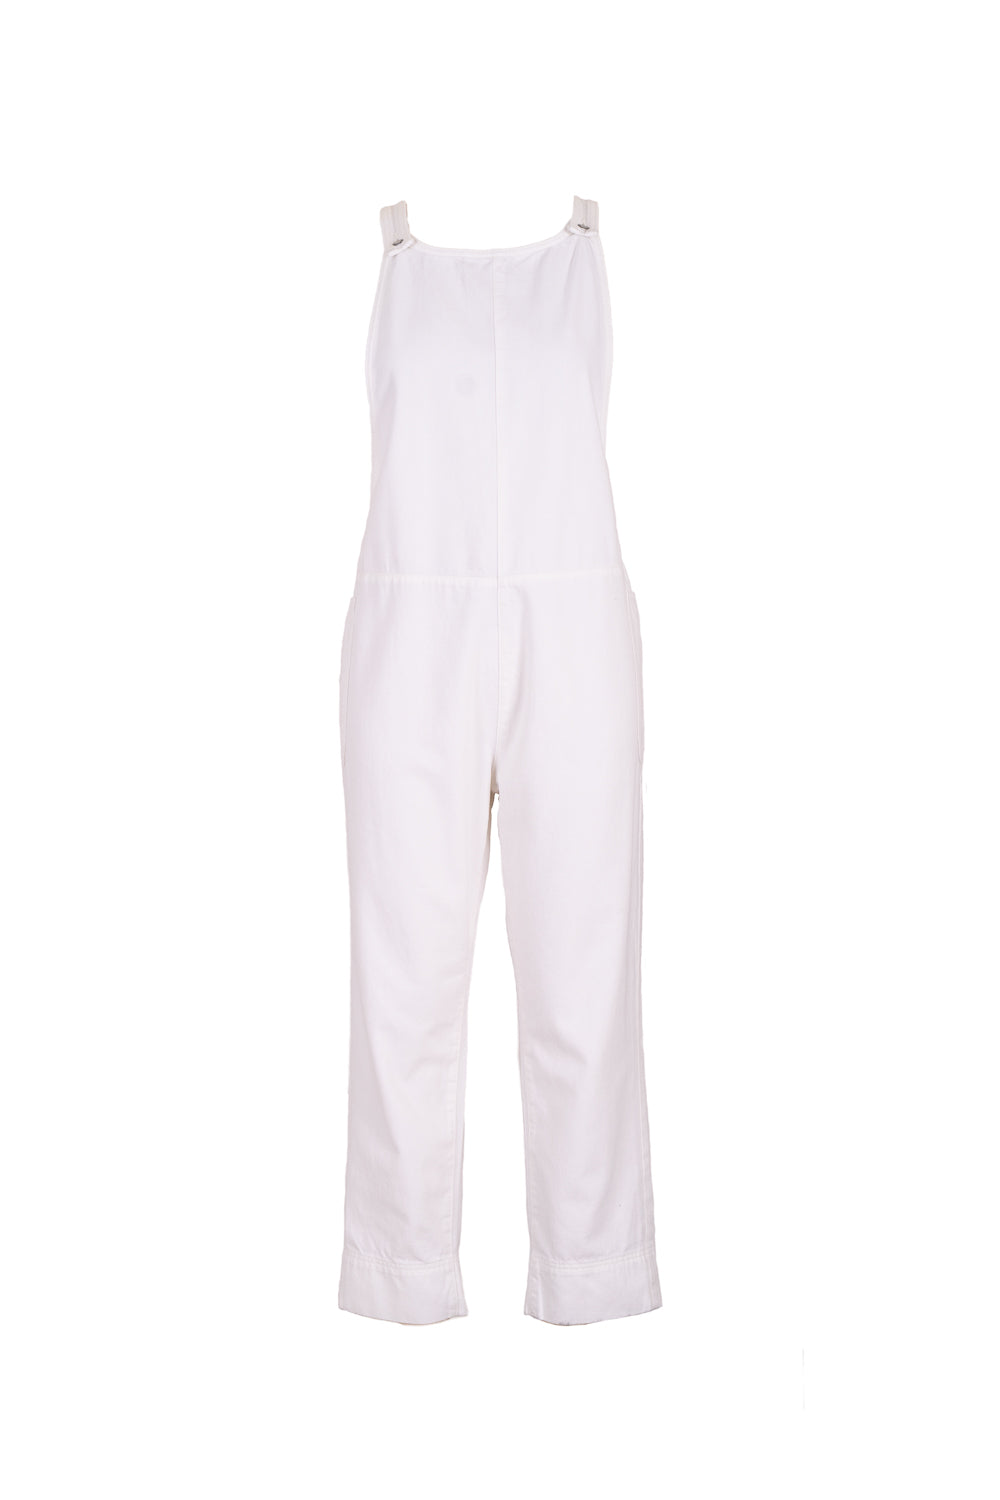 Rosie Overall Dungarees in Ecru